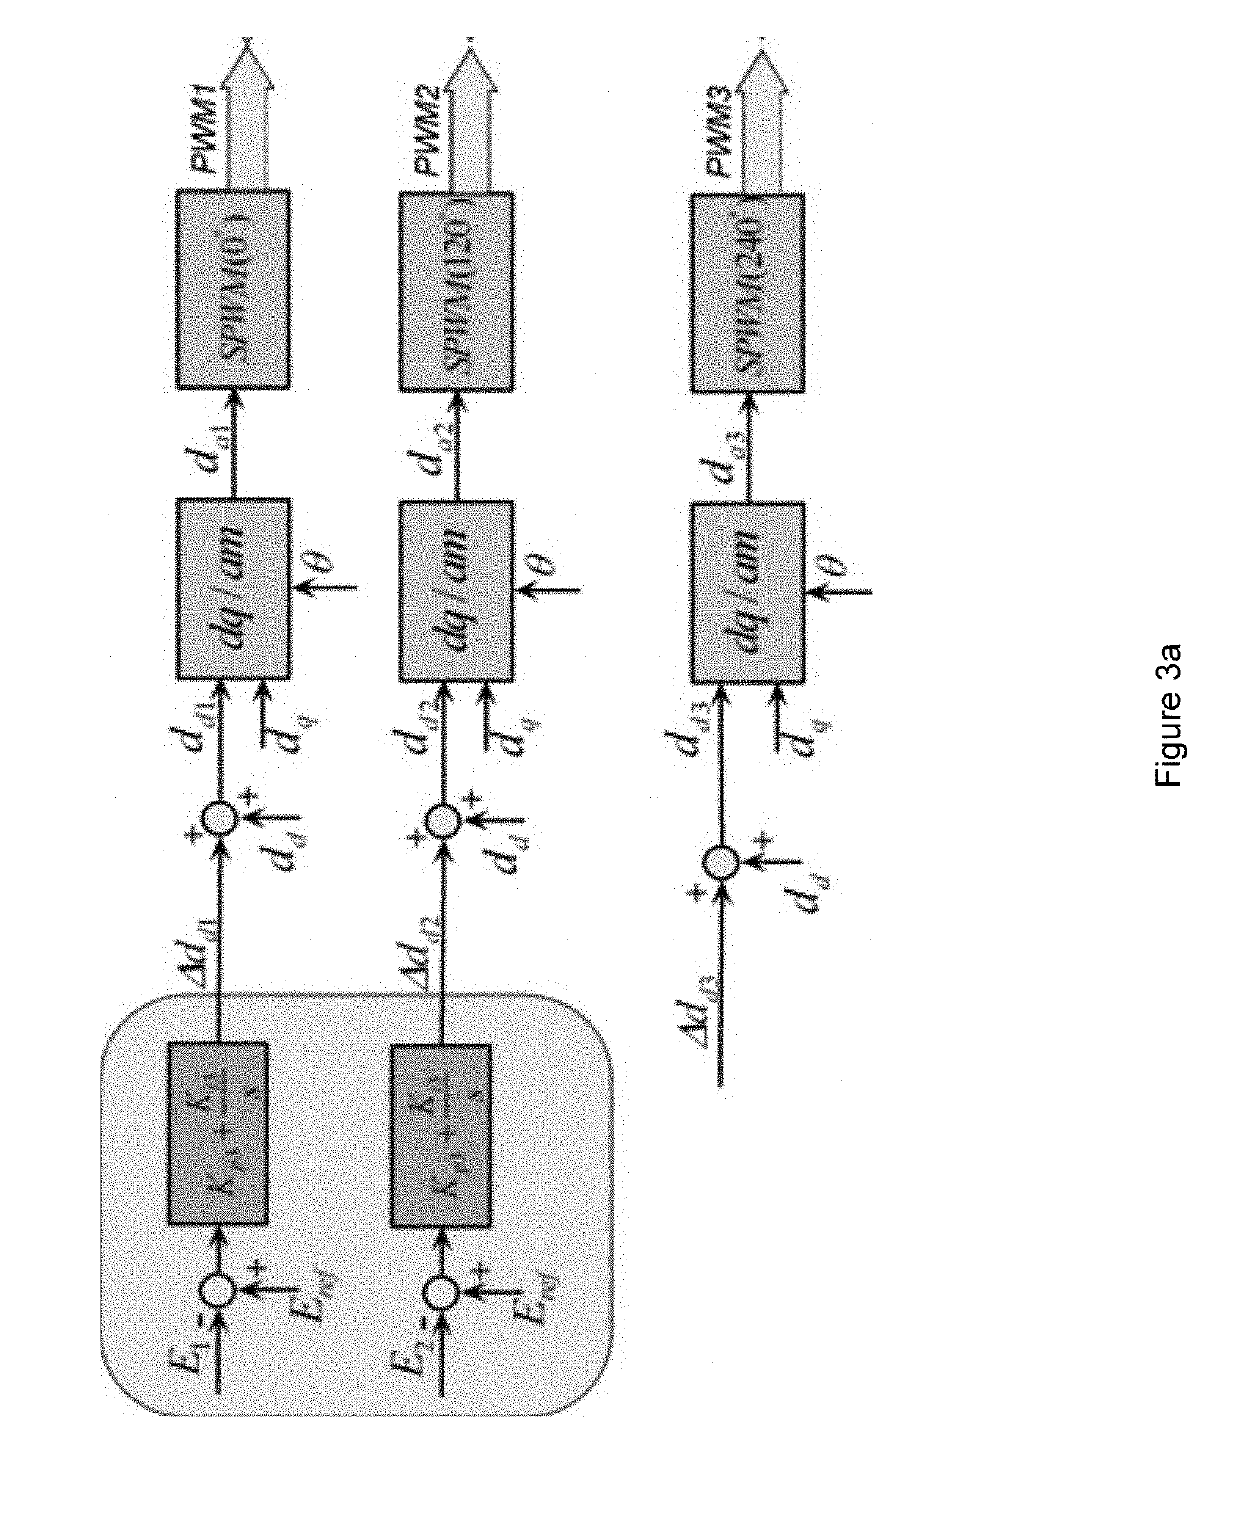 Dual voltage and current loop linearization control and voltage balancing control for solid state transformer